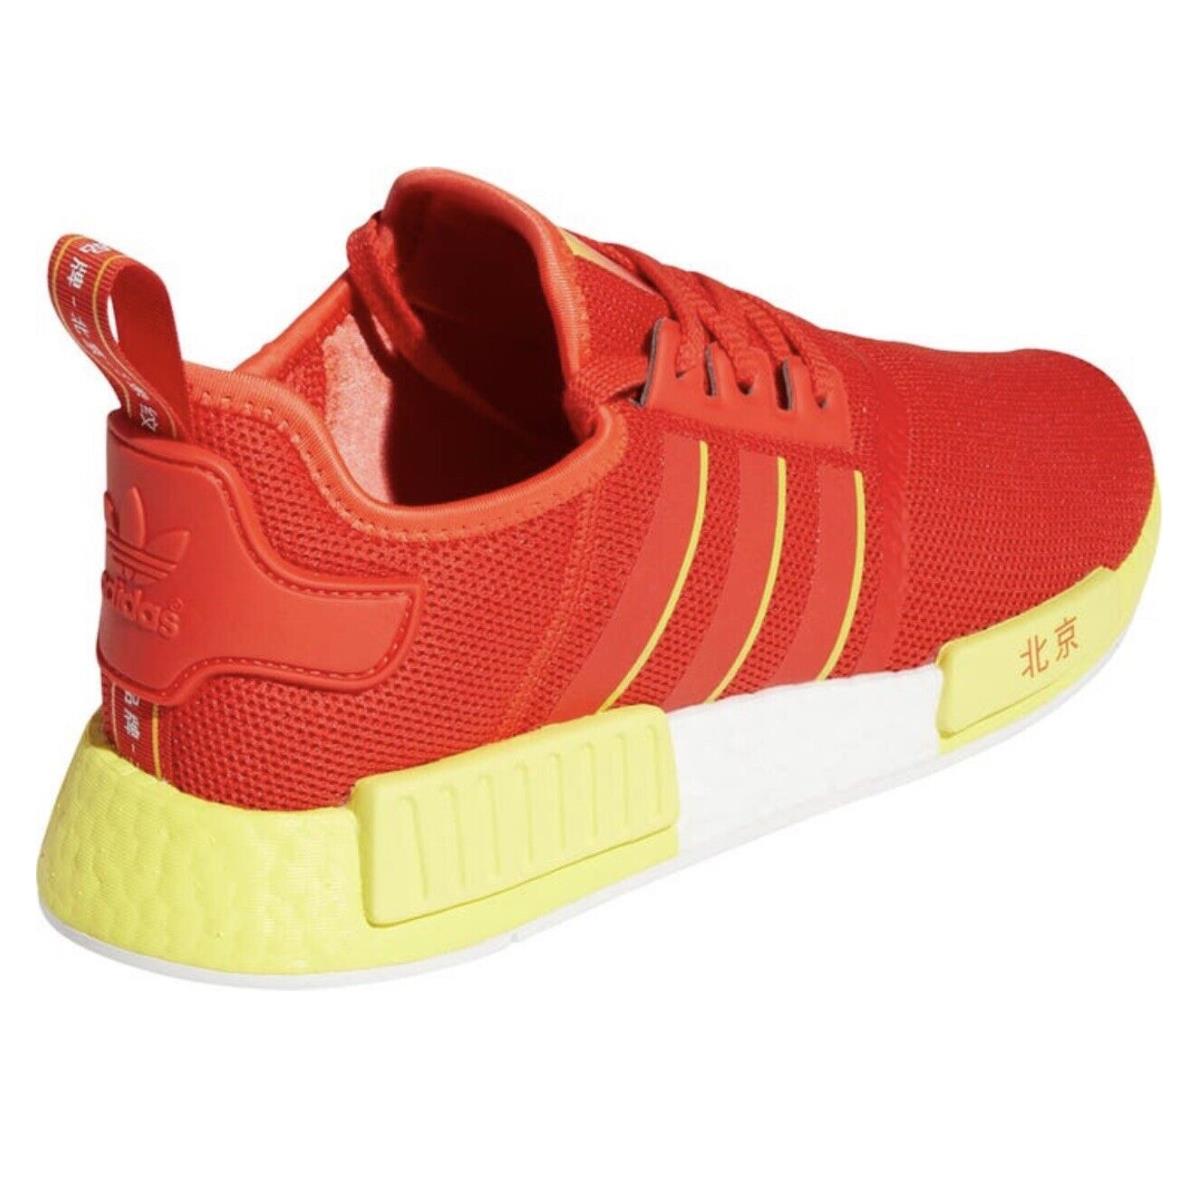 Adidas Nmd R1 Beijing Men Sneaker Red - Size 10 - Red